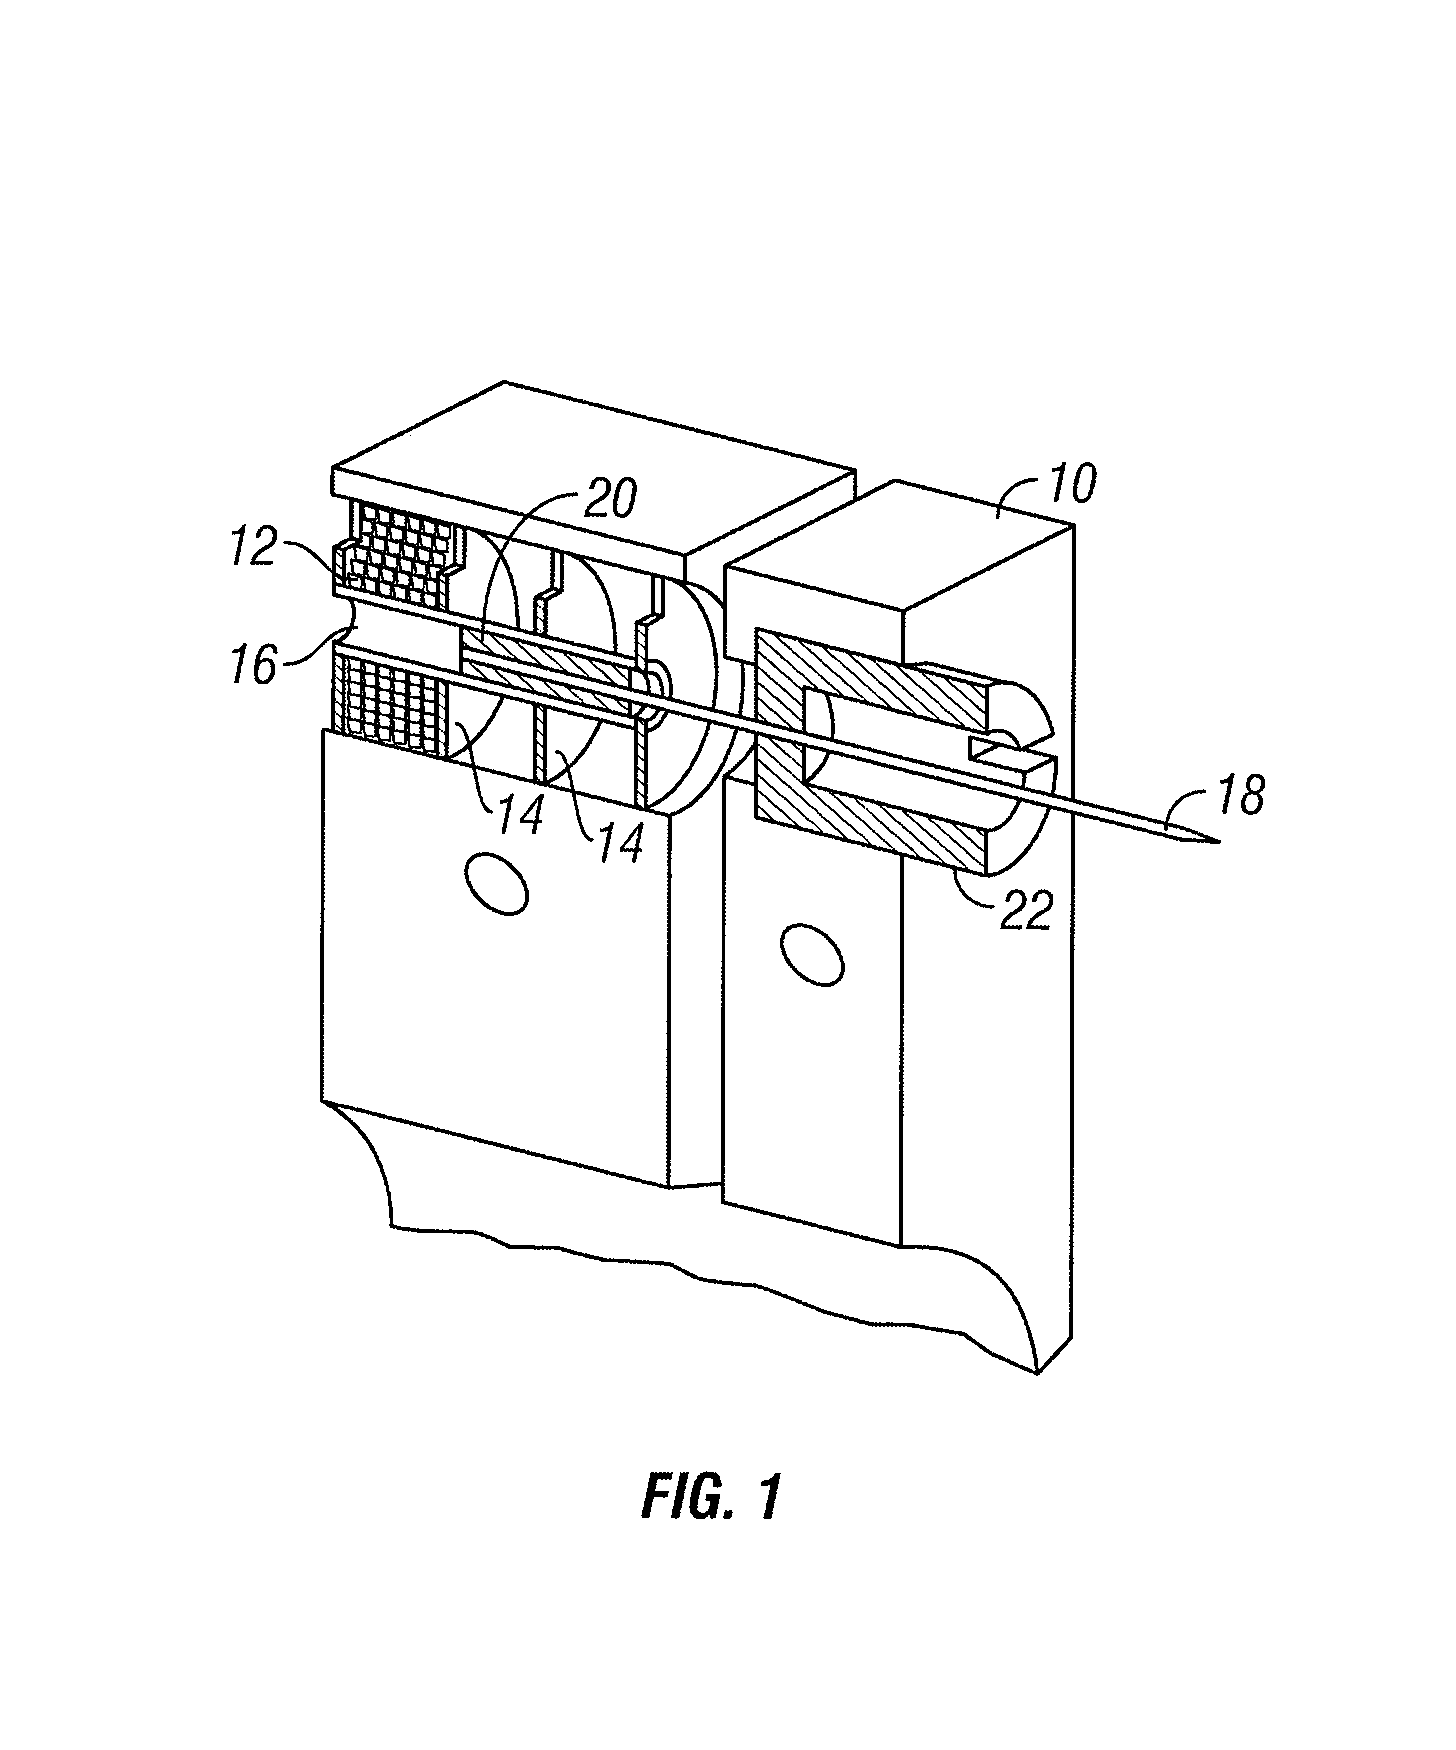 Method and apparatus for penetrating tissue